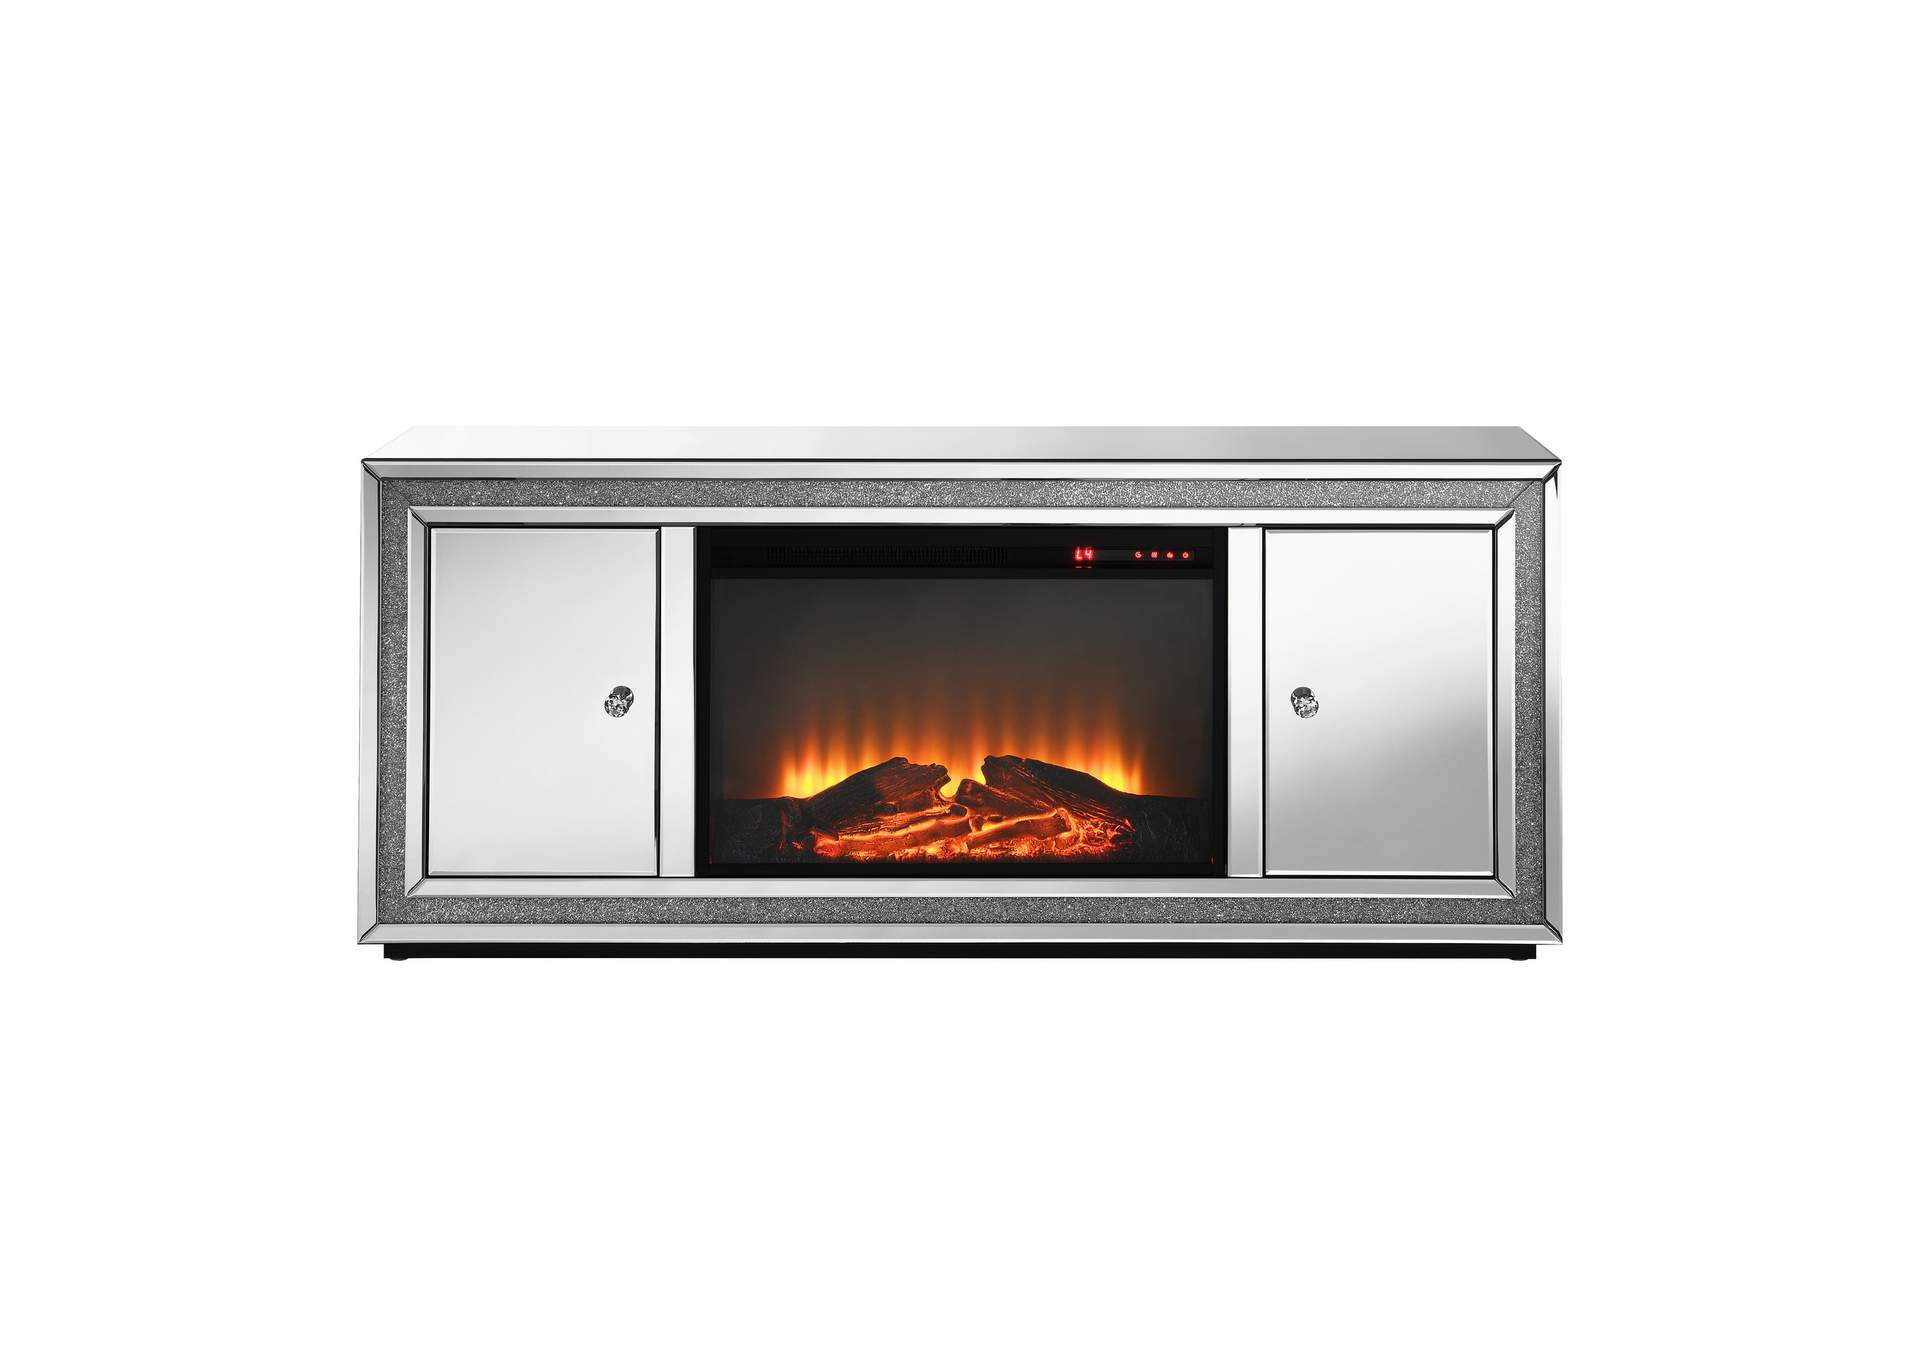 Mirrored Glam Fireplace TV Stand,Global Furniture USA